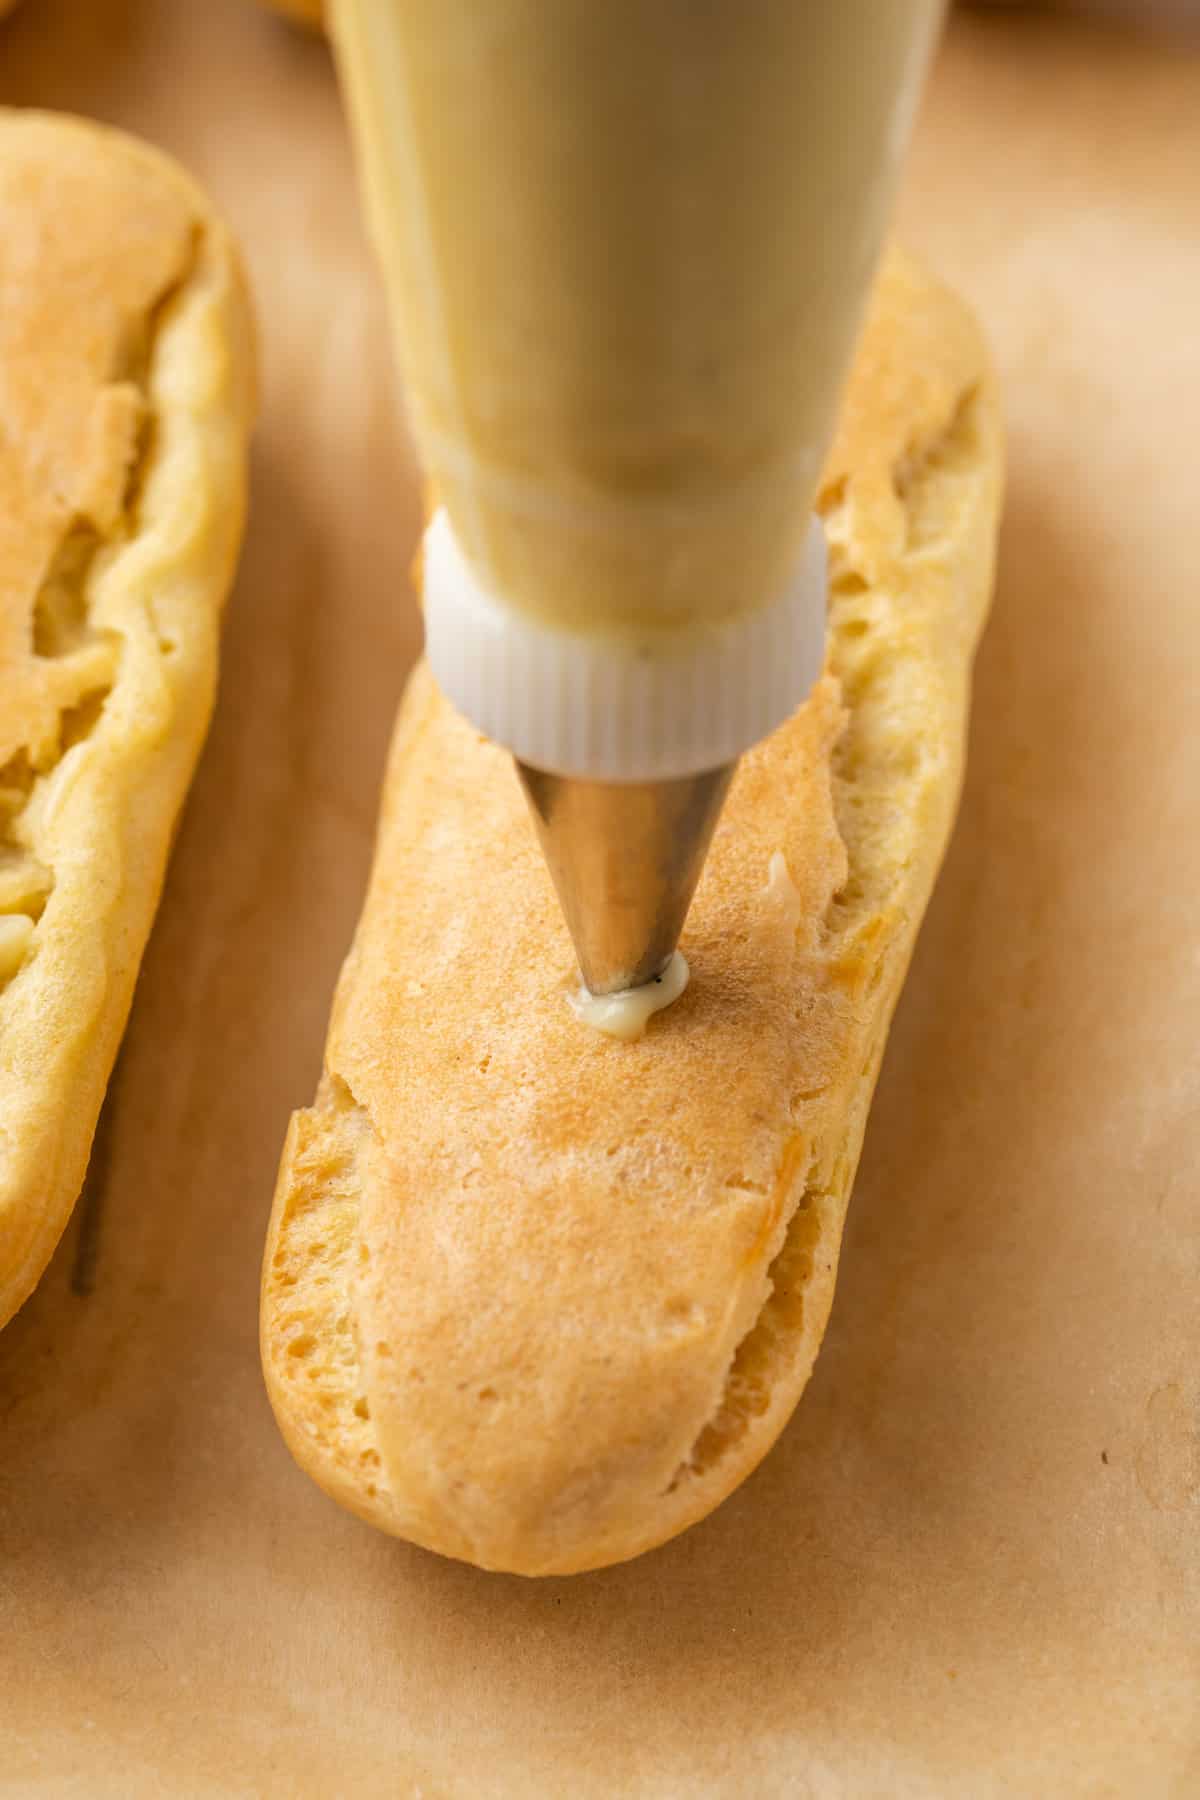 A narrow piping tip pipes vanilla pastry cream into an upside-down gluten-free eclair pastry.